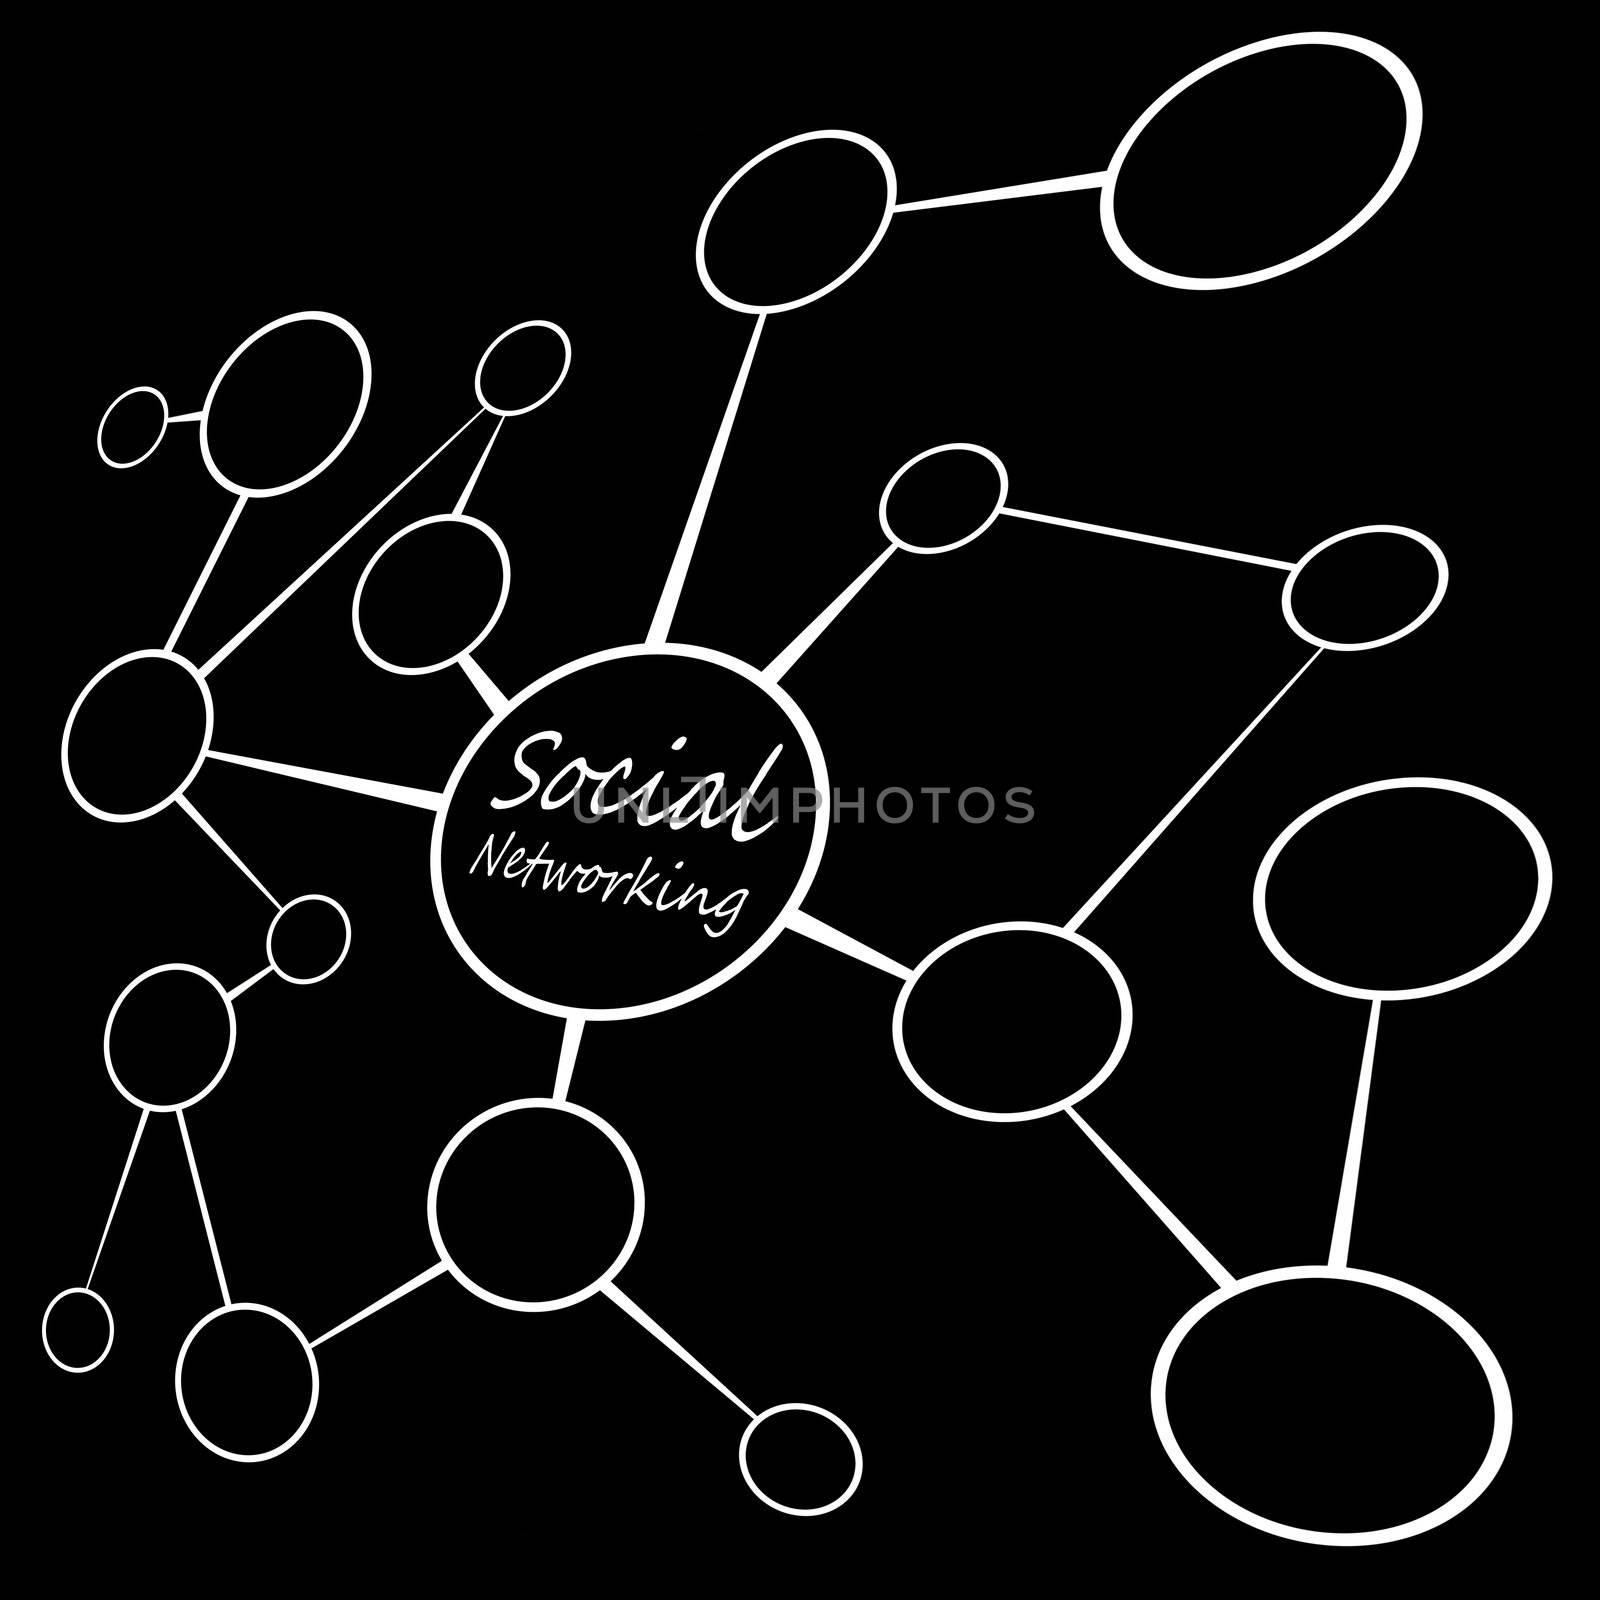 An empty flow chart diagram with circles connecting together. A great social media or social networking concept.  Add your own text or images.